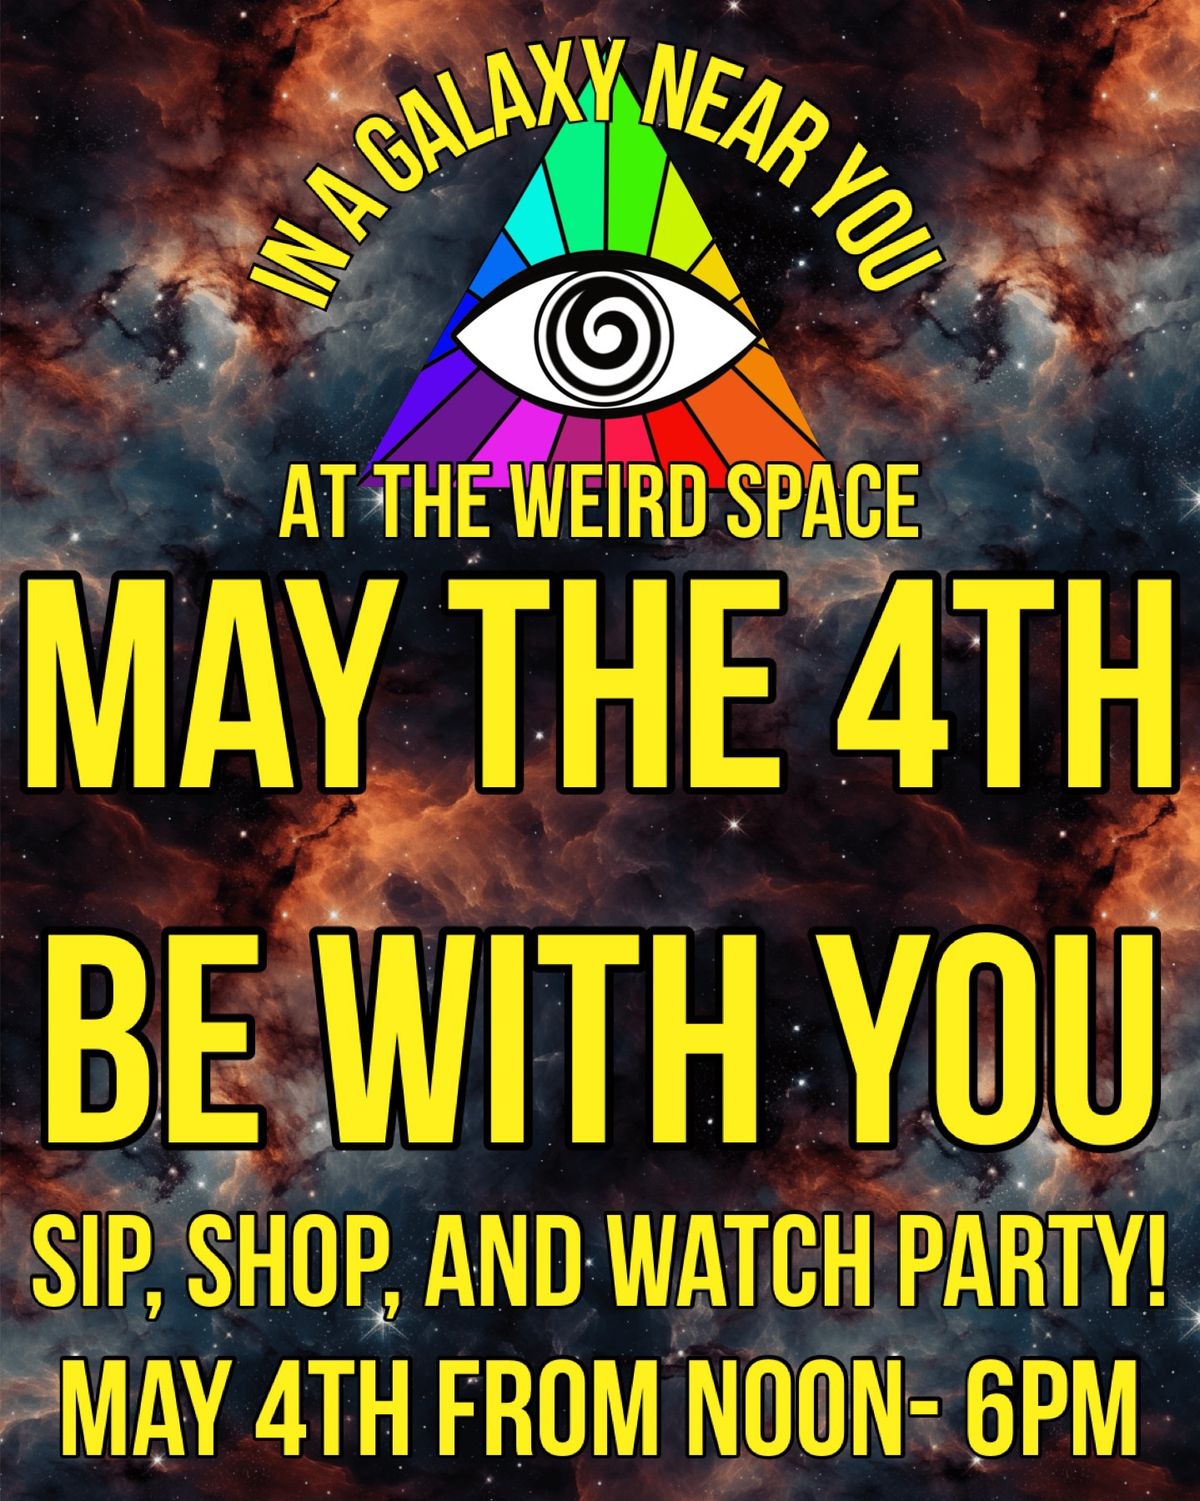 May the 4th: Sip, Shop, and Watch Party! 